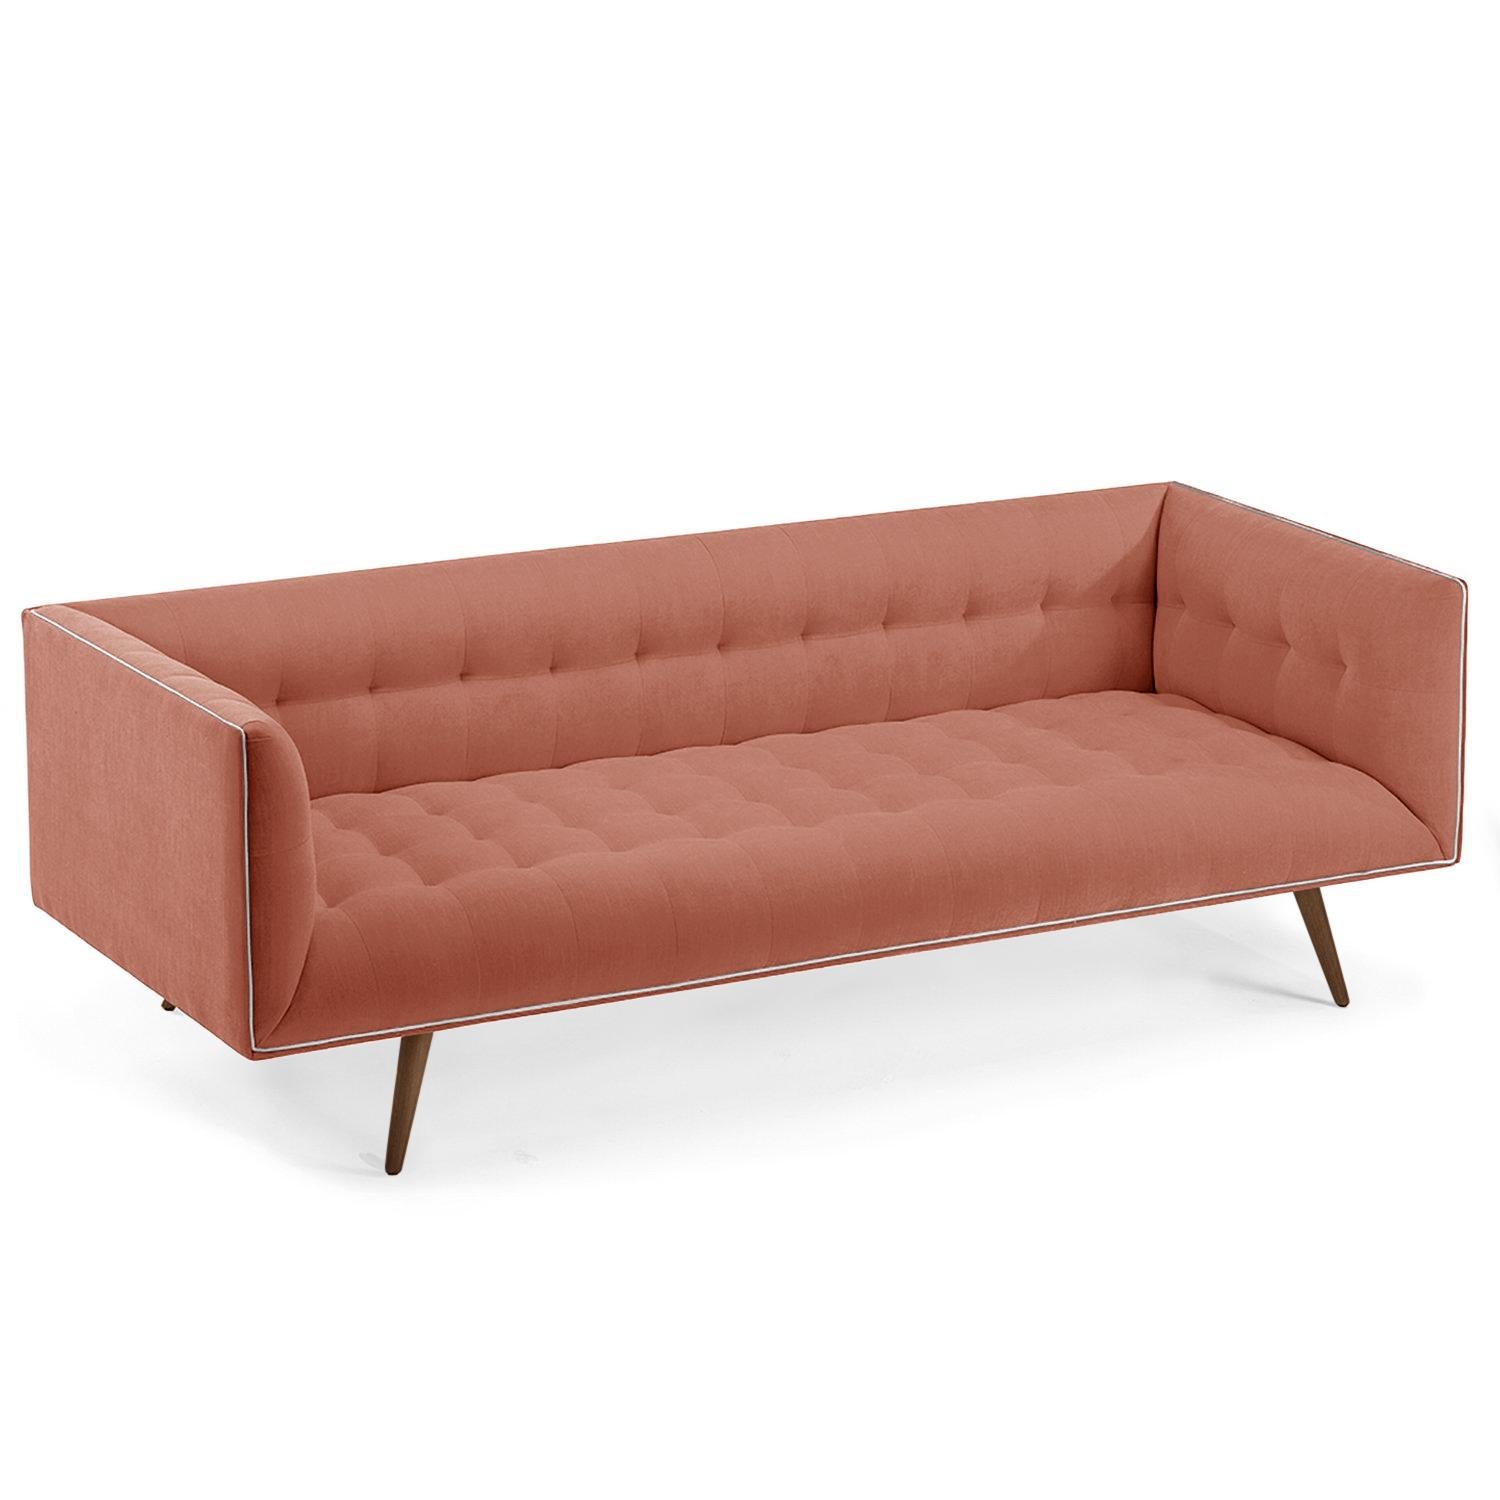 Hand-Crafted Dust Sofa, Medium with Beech Brown For Sale